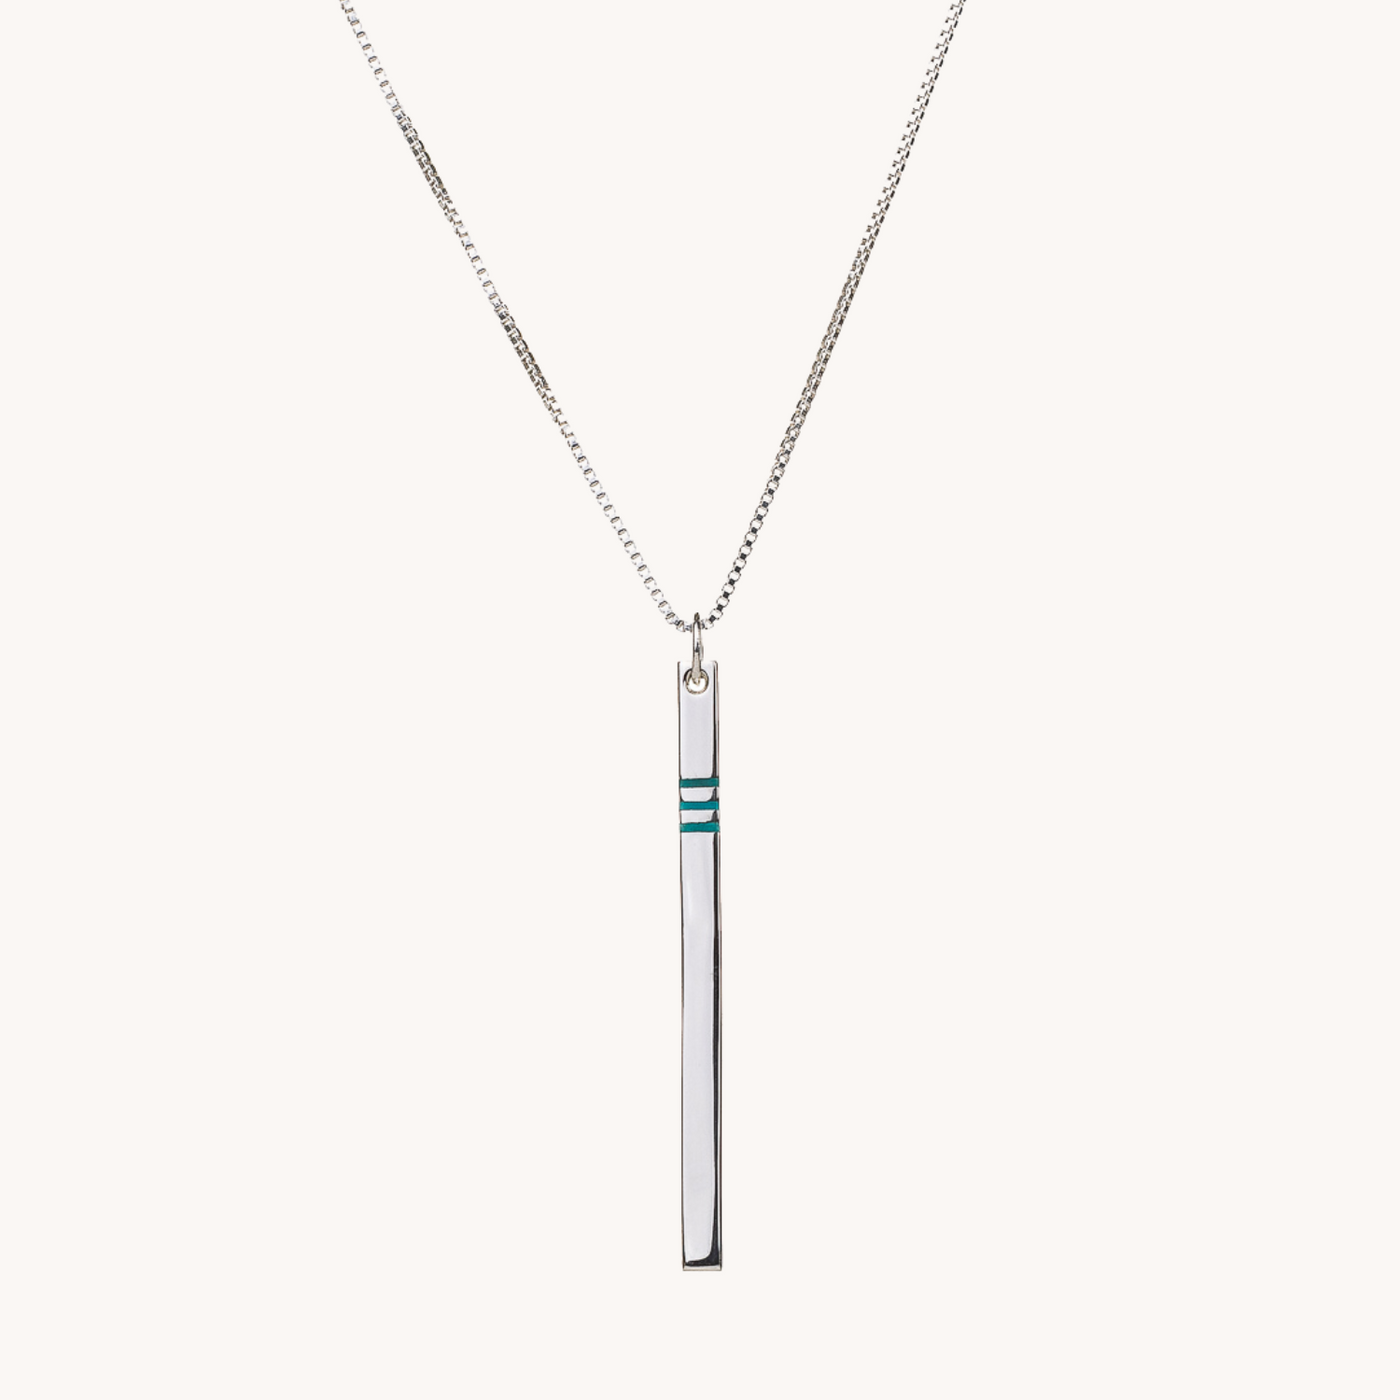 Sterling Silver and Turquoise Drop Pendant Necklace by TSkies